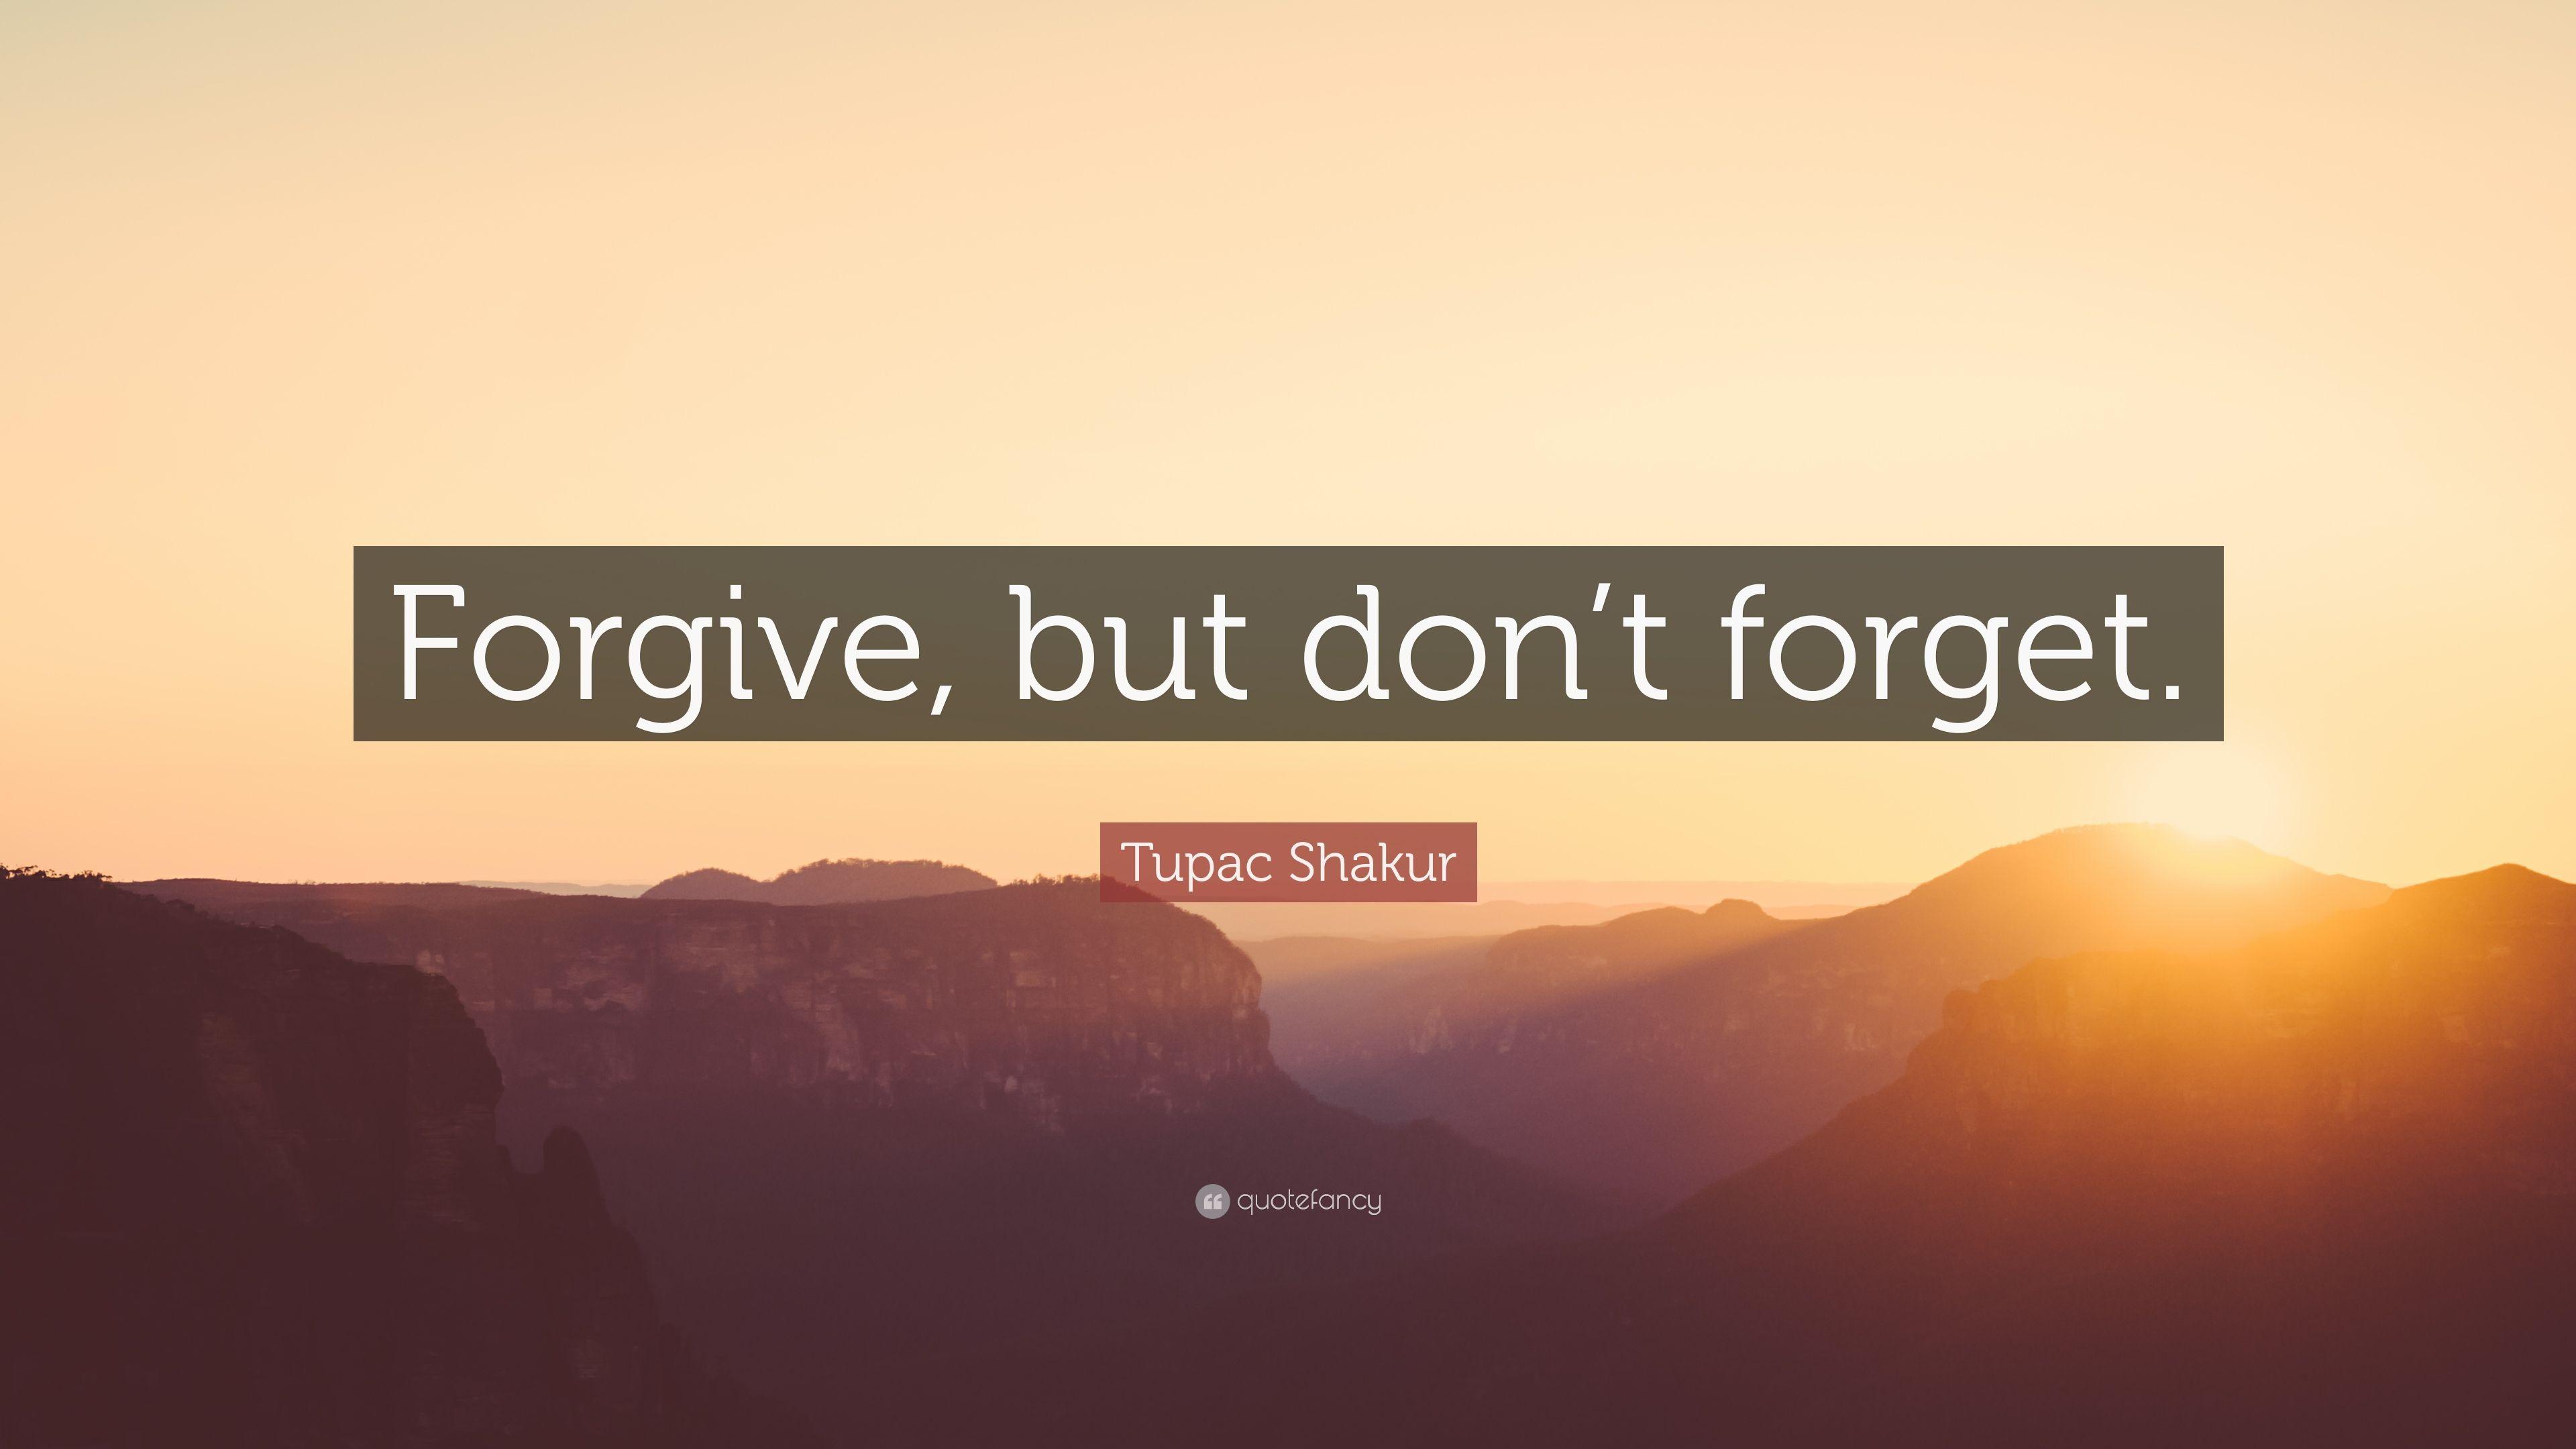 Tupac Shakur Quote: “Forgive, but don't forget.” 12 wallpaper